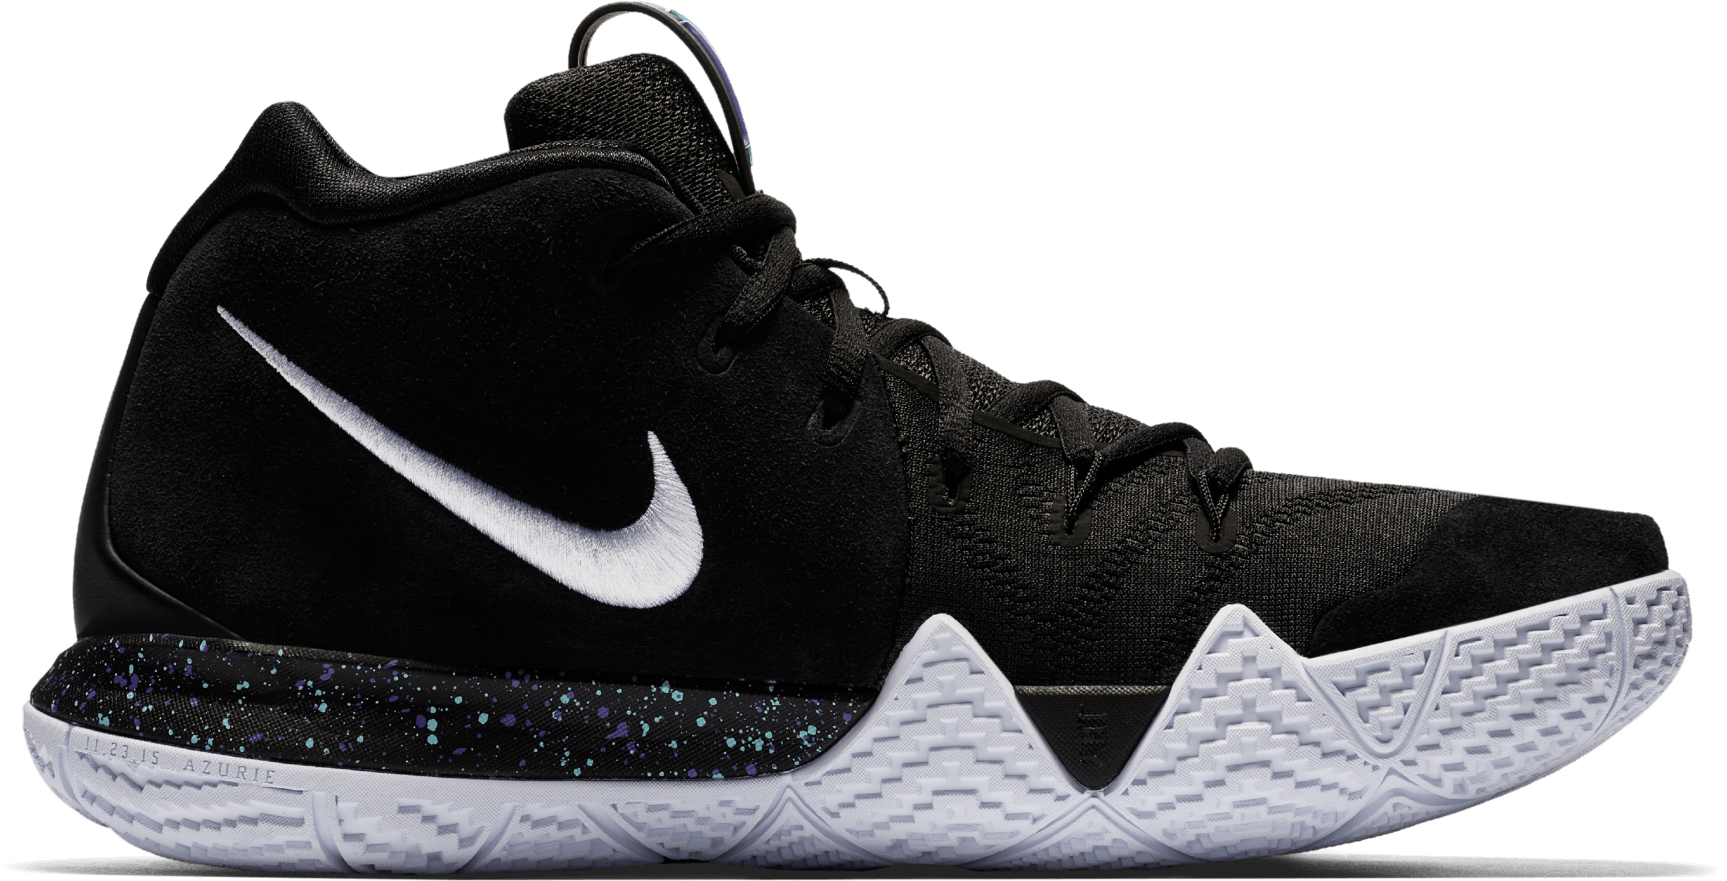 Nike Kyrie 4 Performance Review